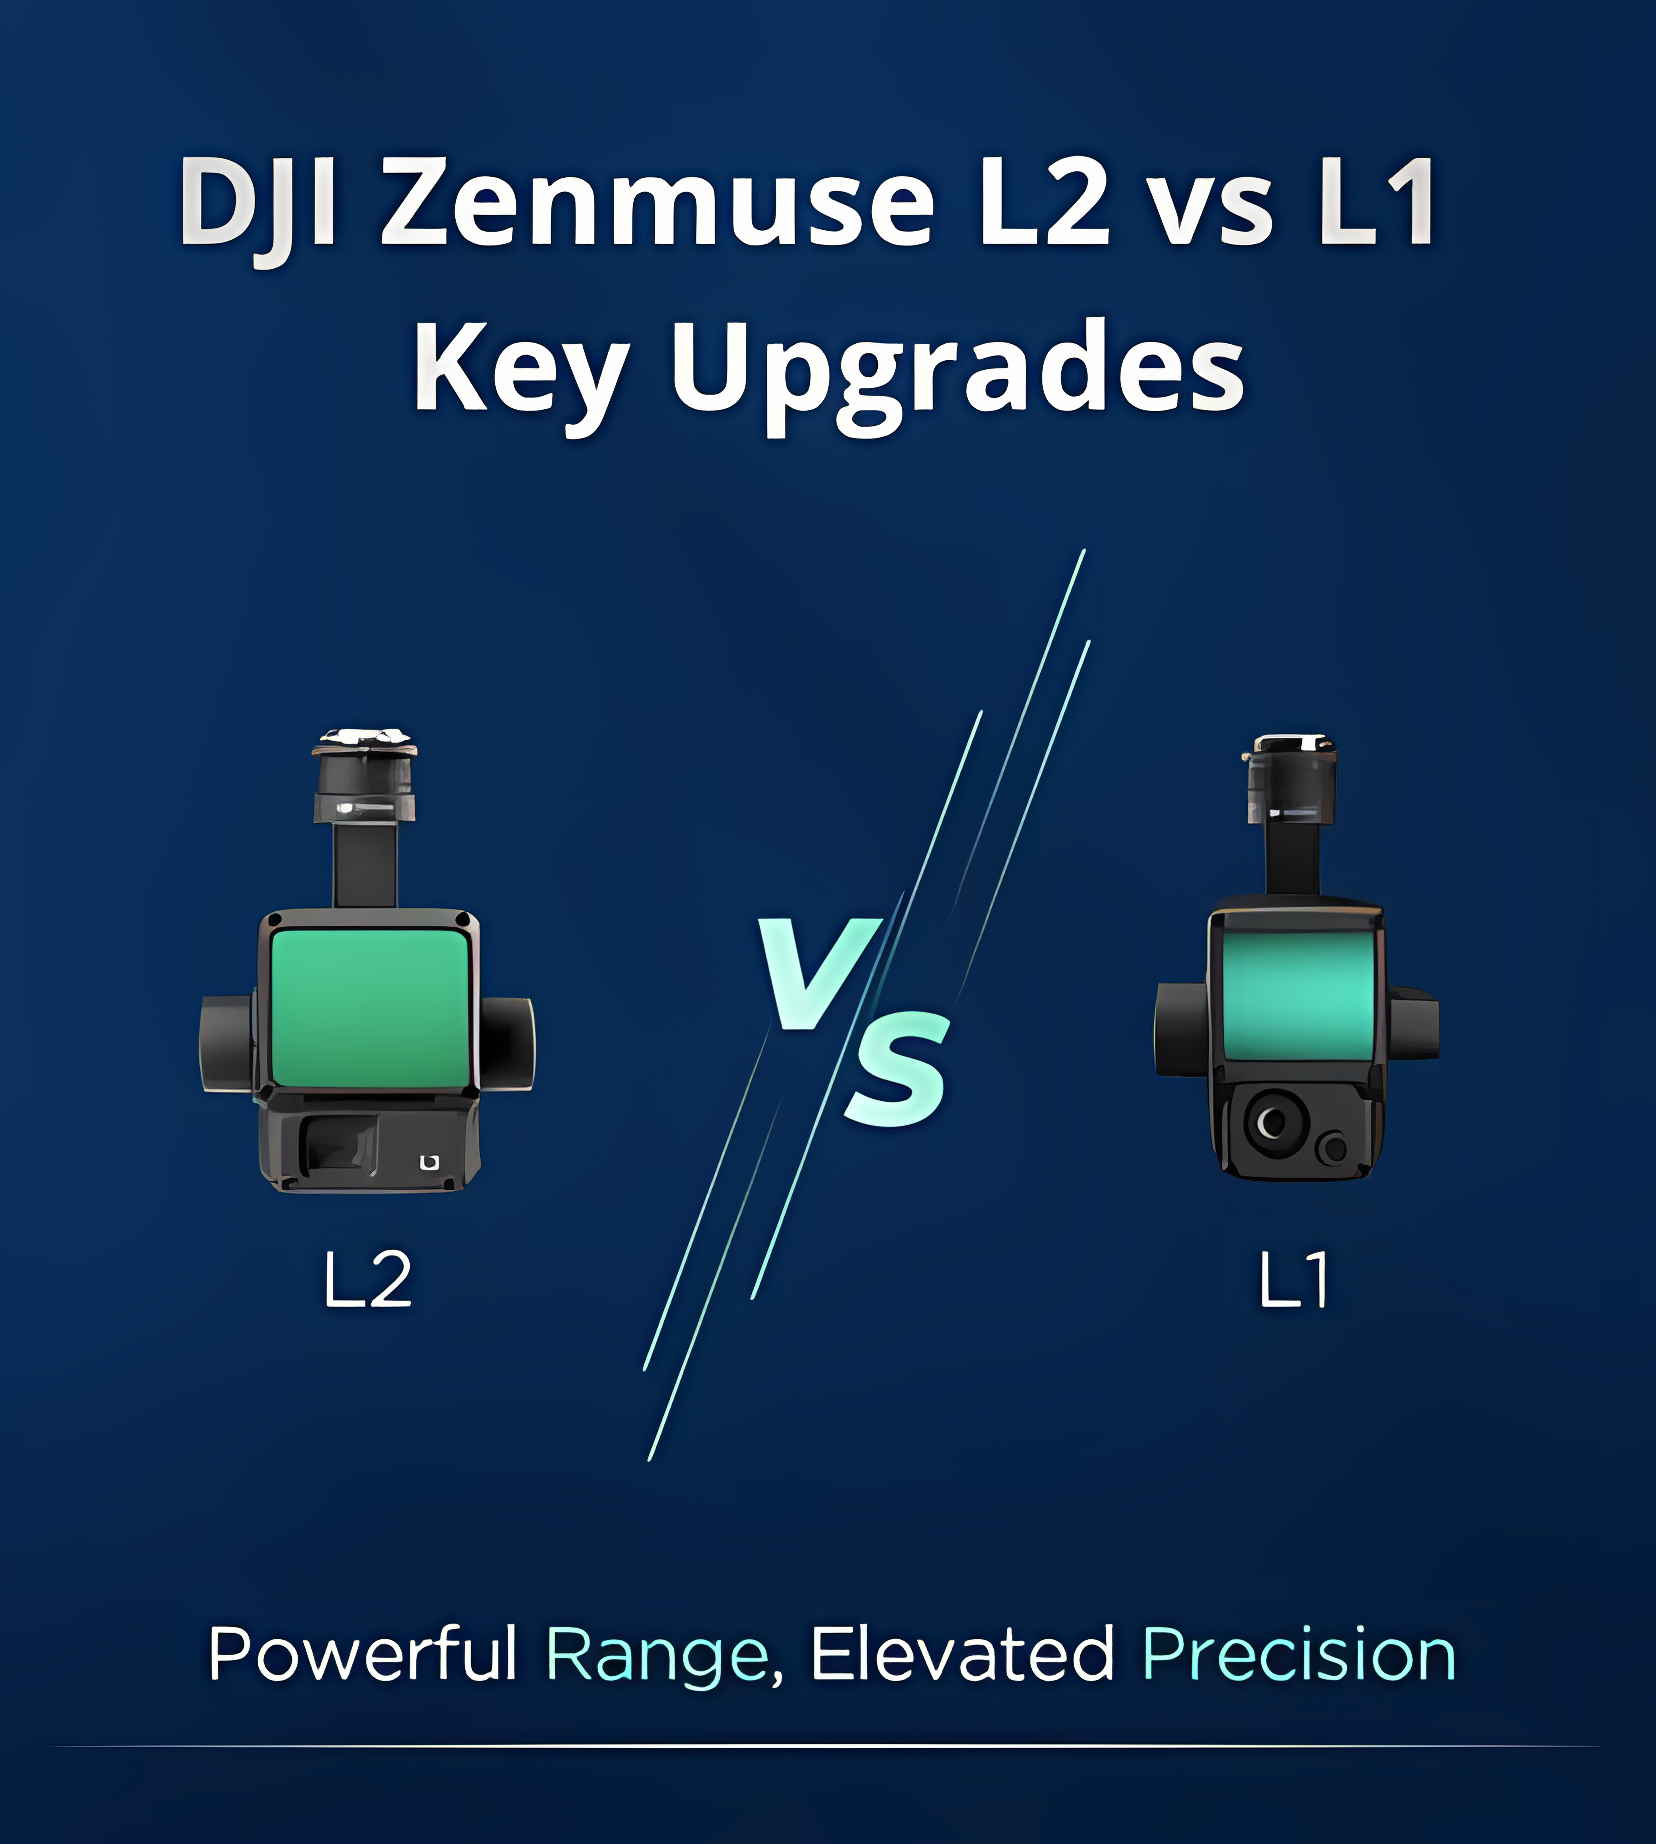 Everything You Need To Know About DJI's Zenmuse L2 - The Replacement to the Zenmuse L1